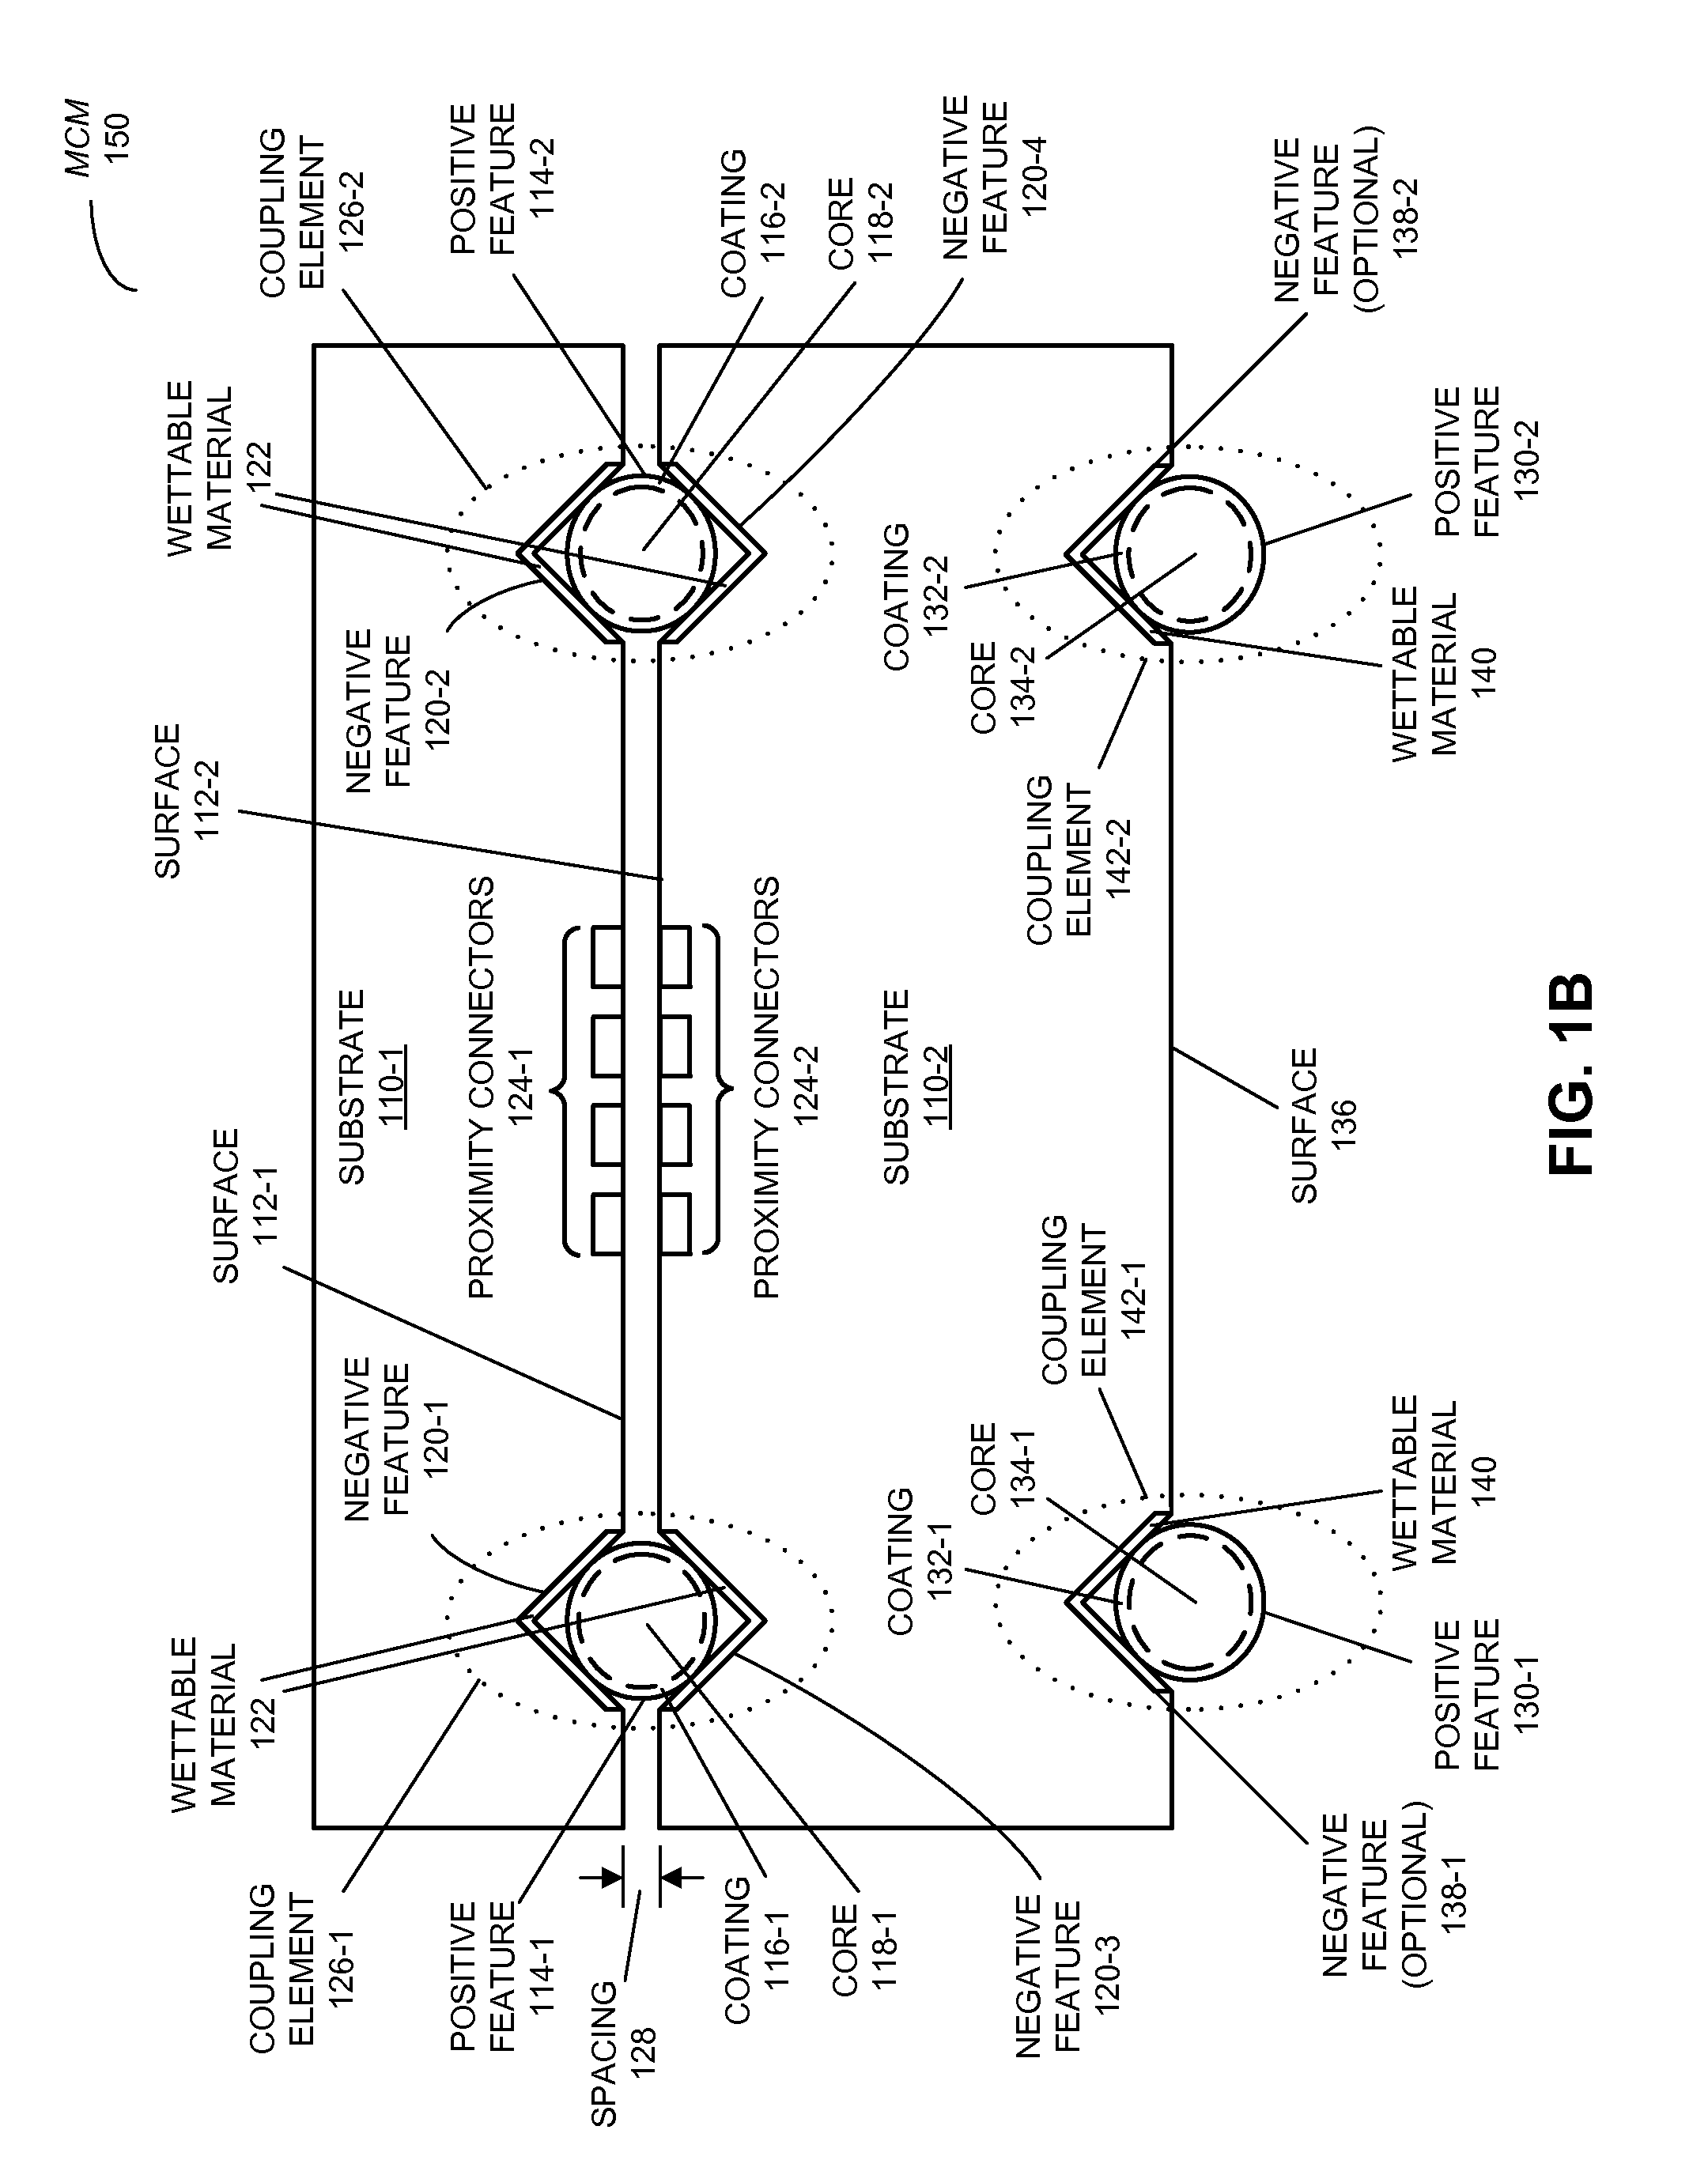 Assembly of multi-chip modules using reflowable features